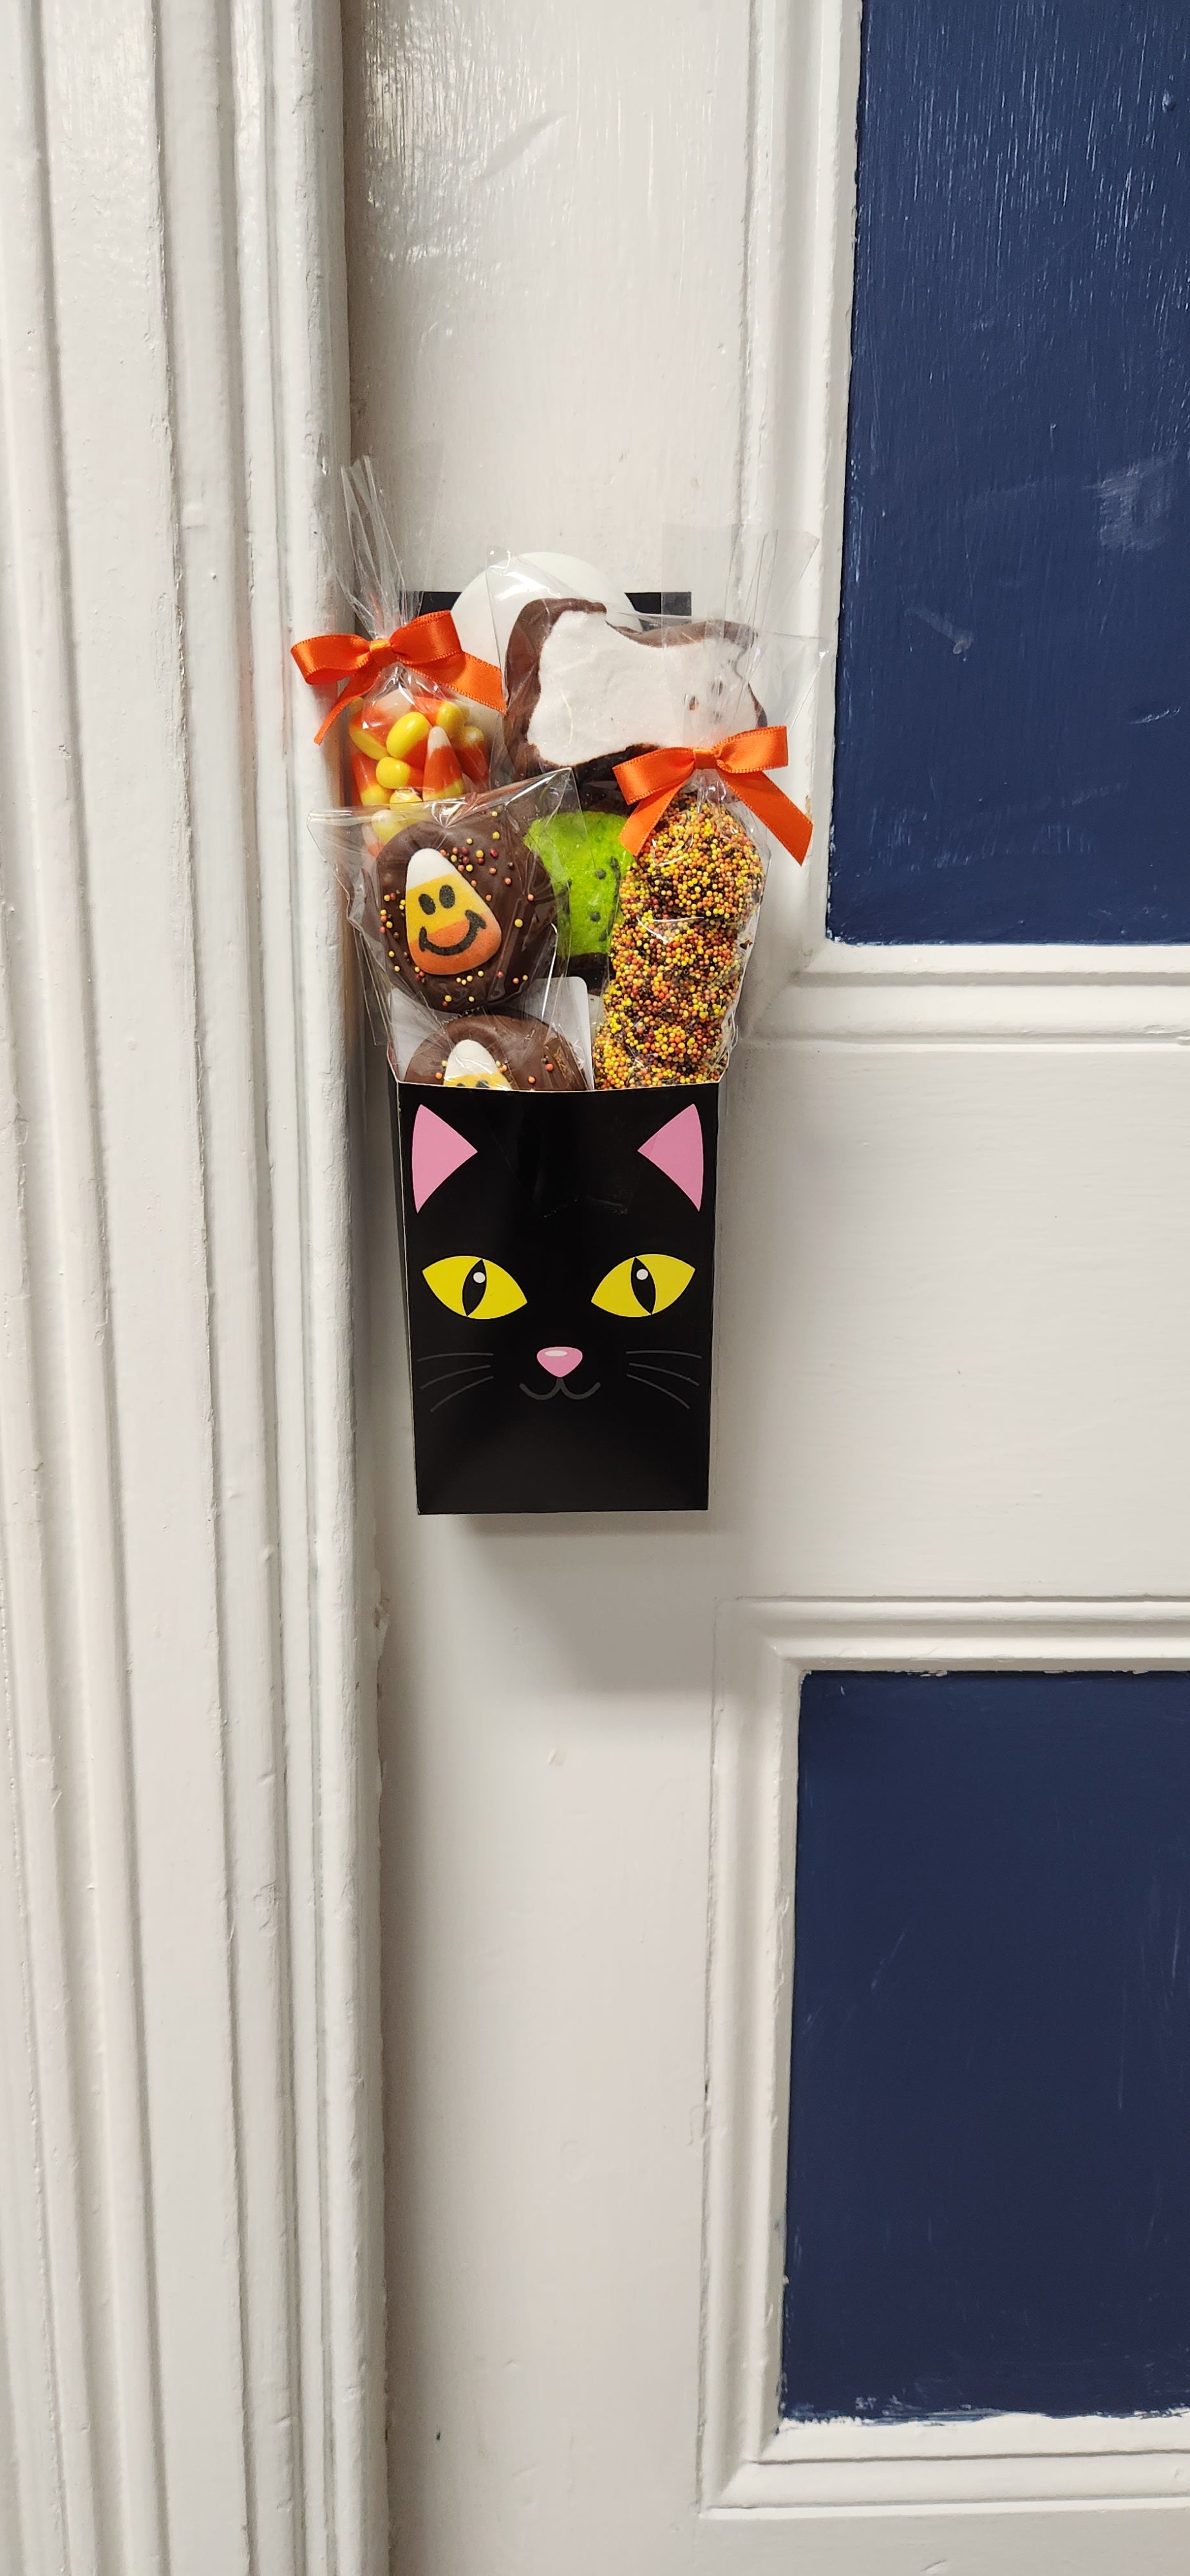 A Halloween Door Hanger pictured in use on a blue and white door